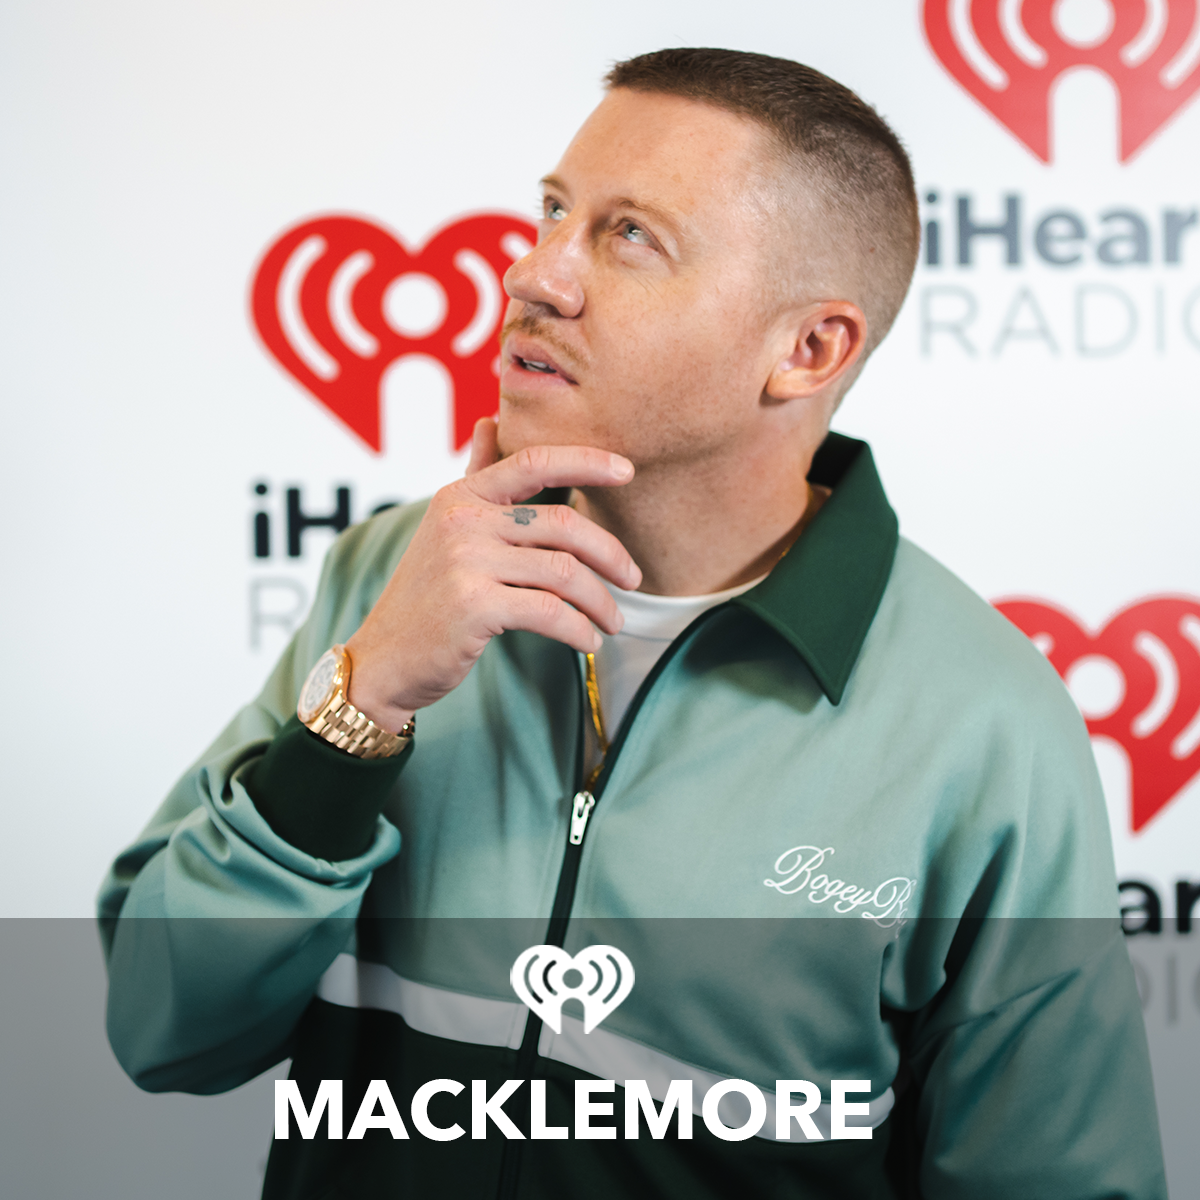 Macklemore on his new song 'Maniac', touring with IMAGINE DRAGONS and getting into the TikTok game